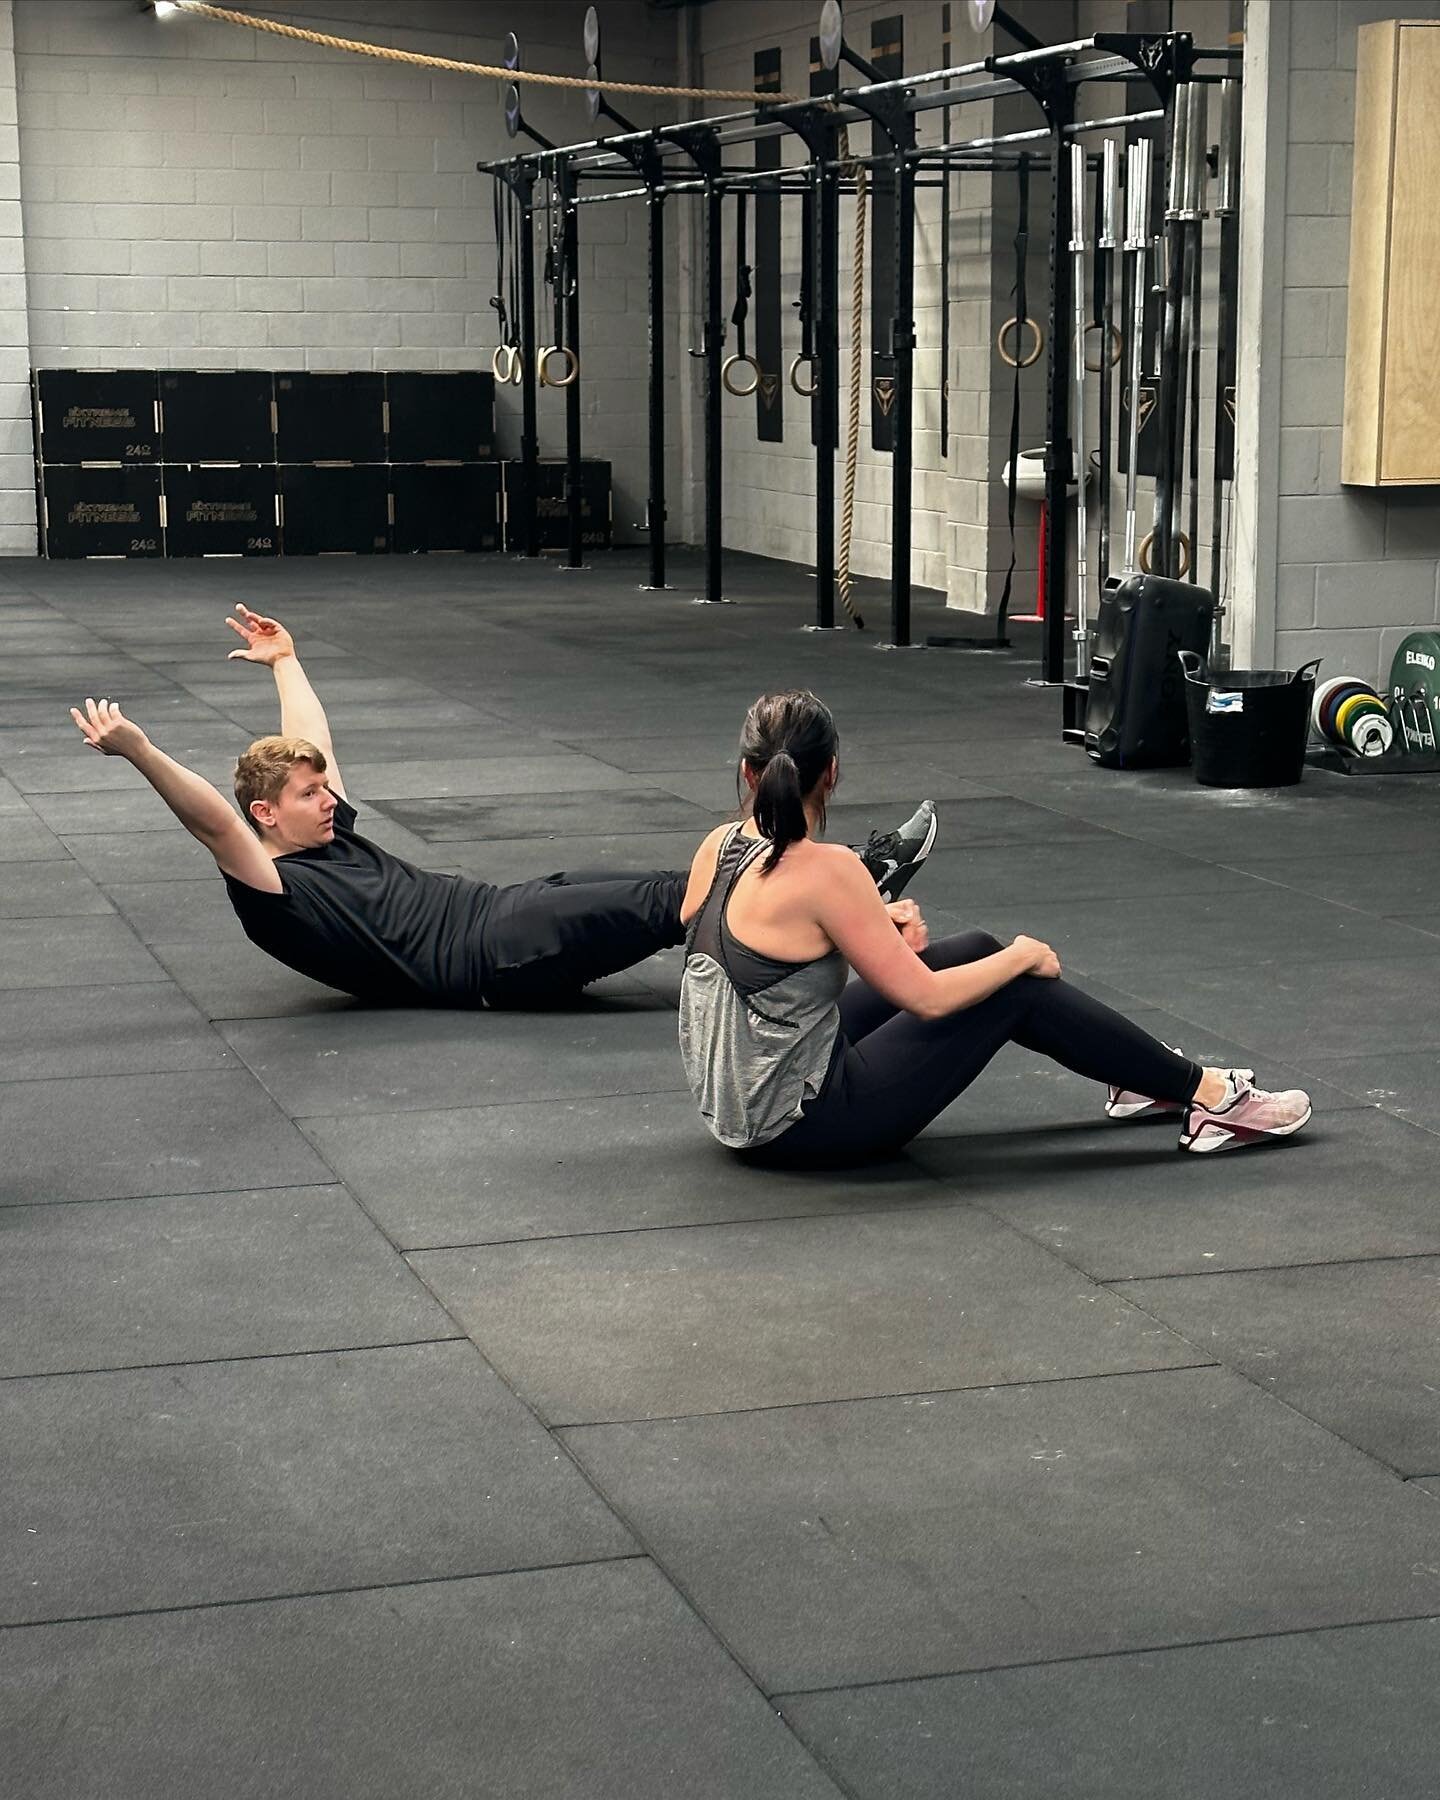 Do you want to get better at gymnastics? Build strength? Increase your aerobic capacity? Coach Bailey is now offering Personal Training sessions and Bespoke Programming. So whether you are wanting to get better at the basics, master your muscle ups o